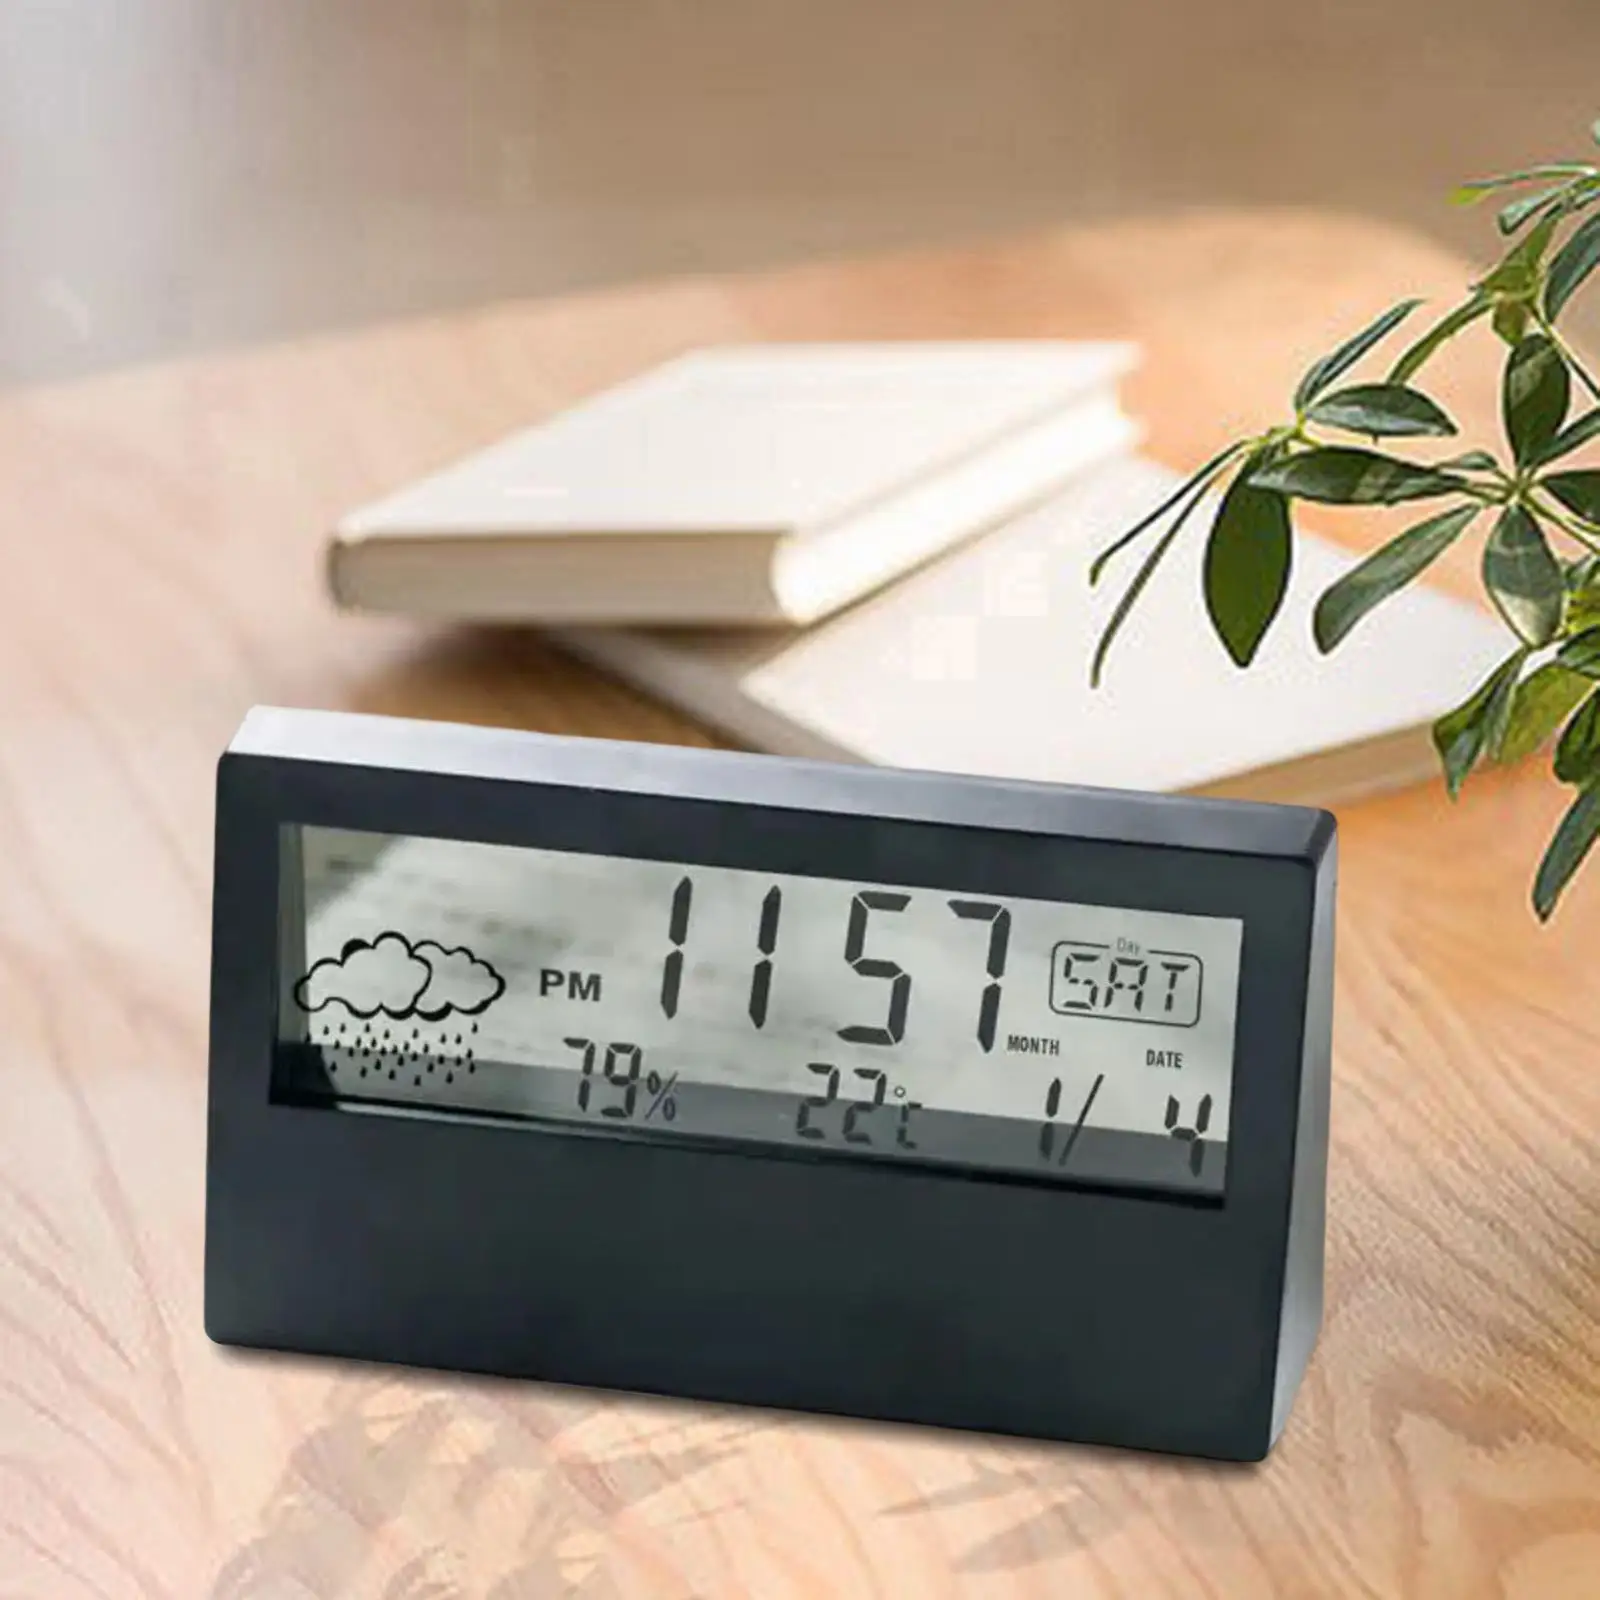 Date Display Bedside Alarm Clocks Easy to Operate Compact Simple Exquisite Practical Digital Alarm Clock for Outdoor Household